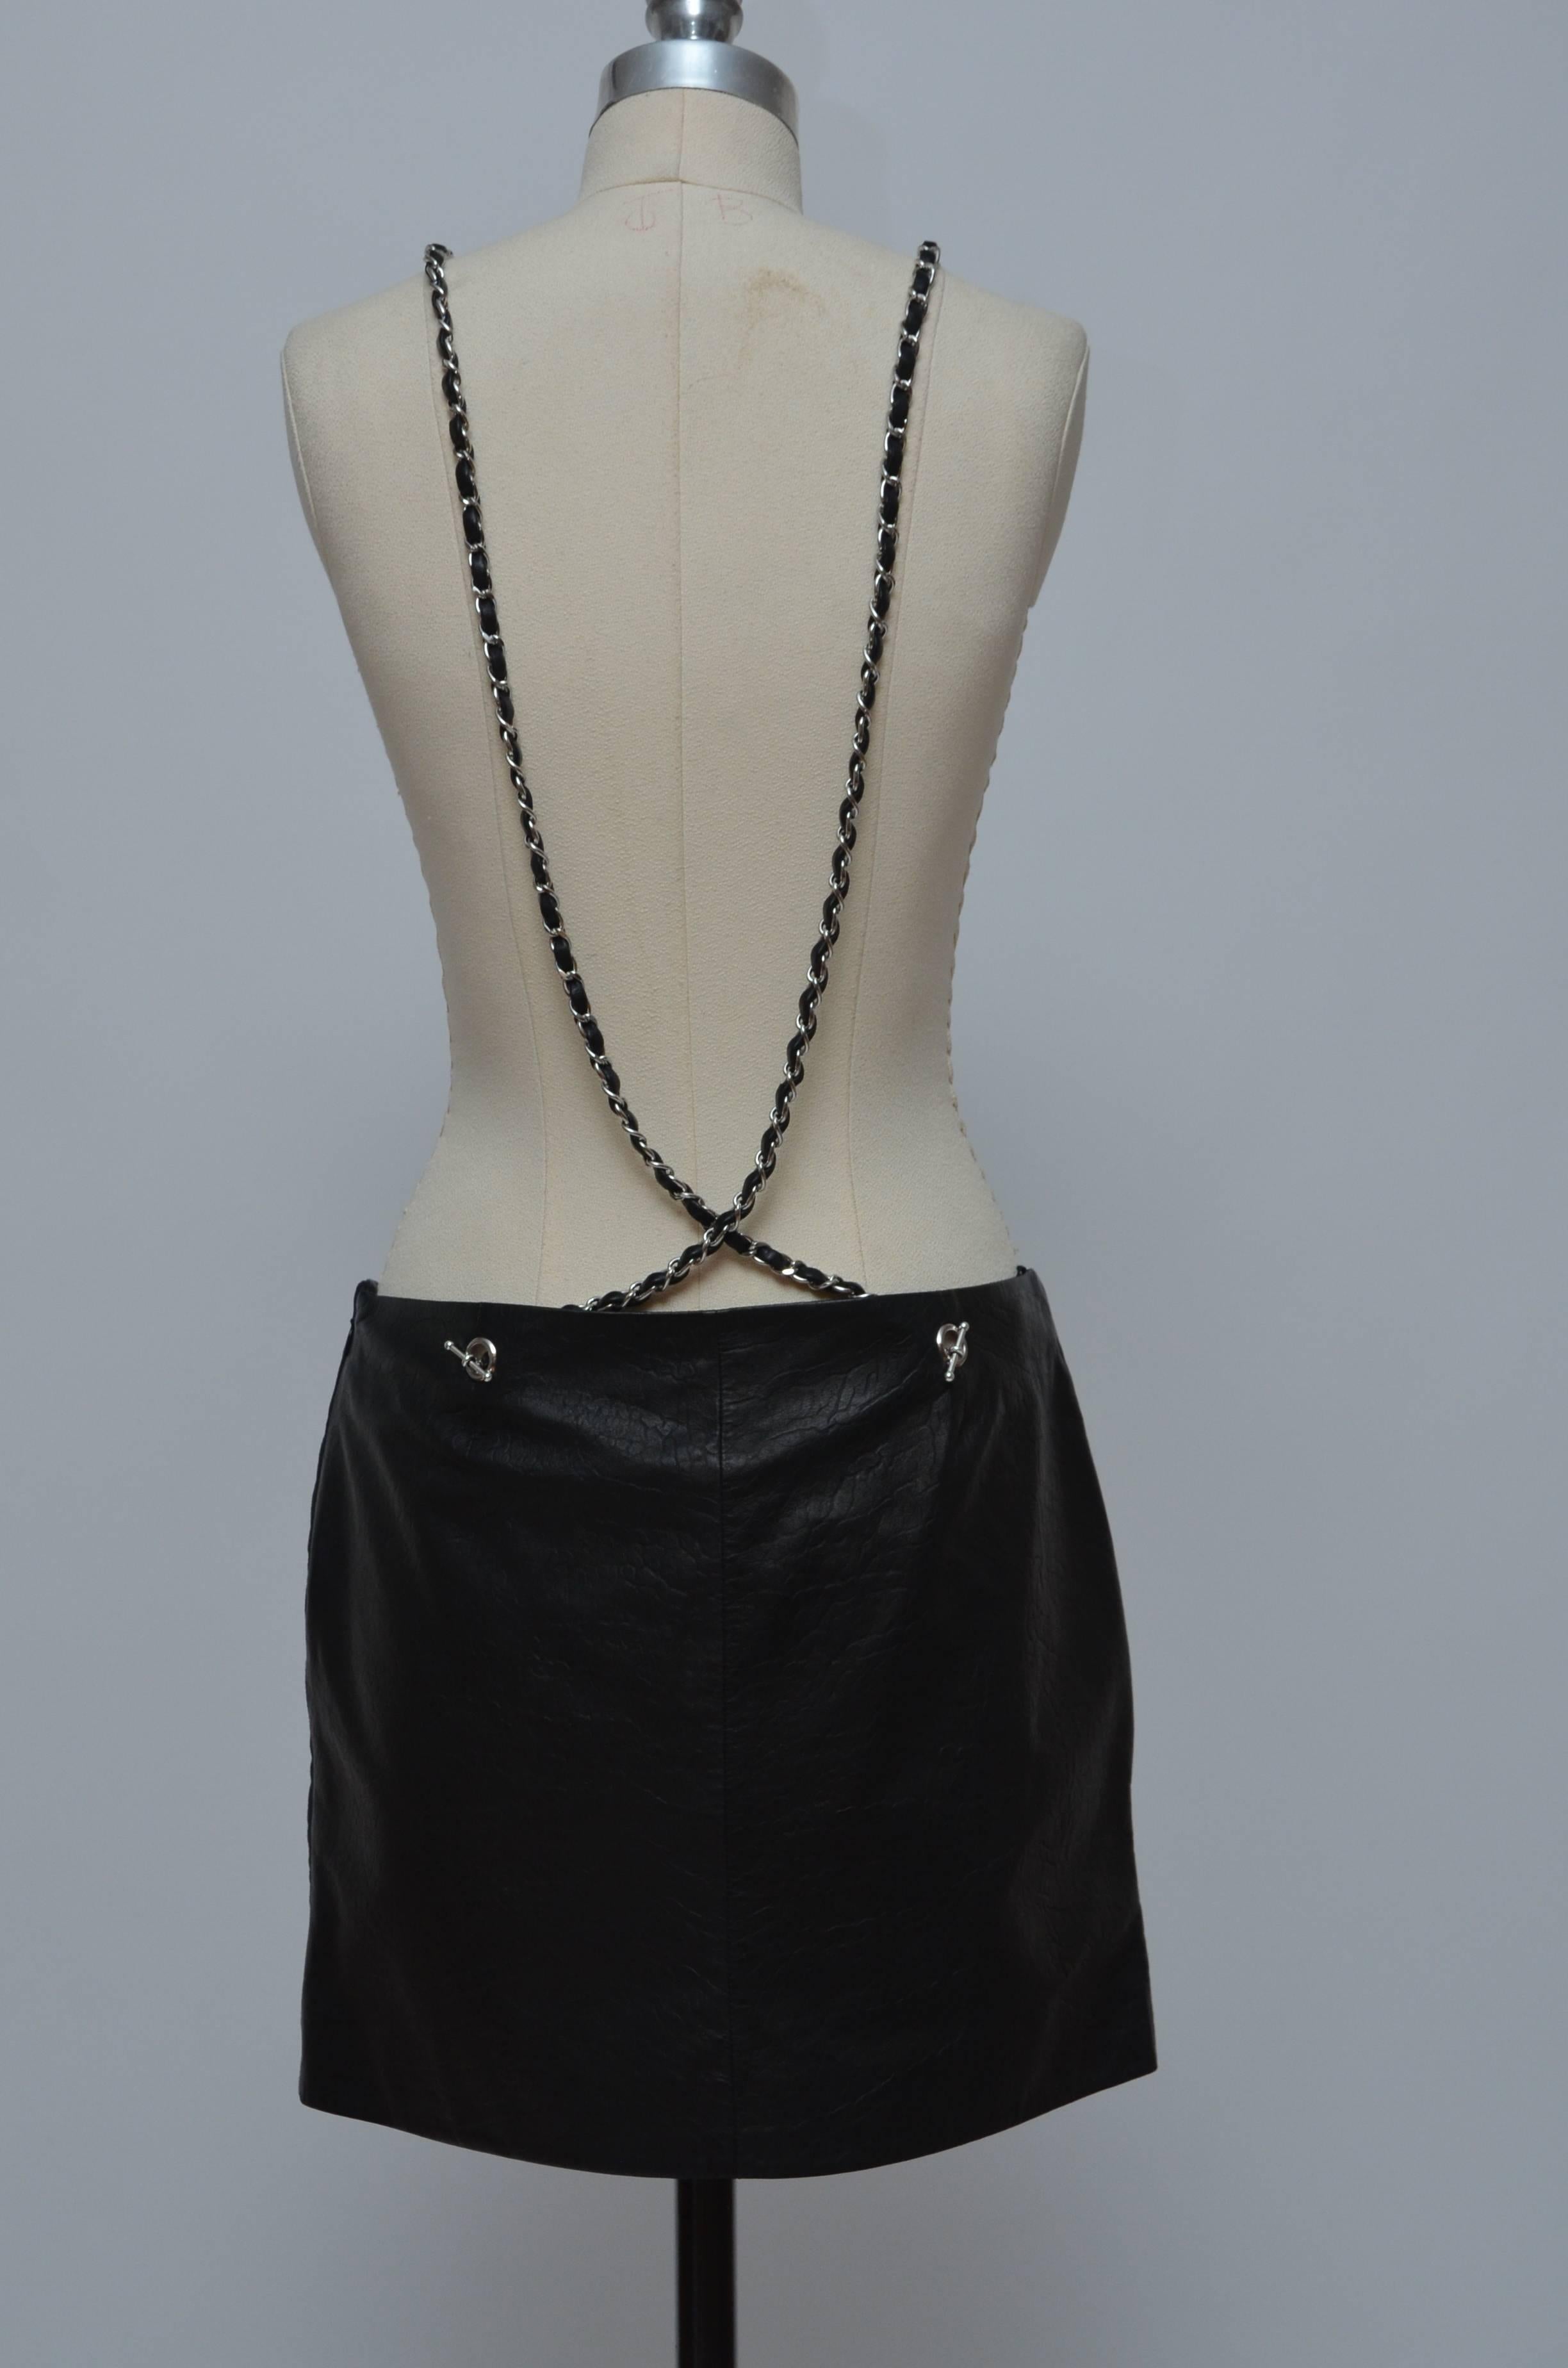 Black Chanel Quilted Lambskin CC Lock Skirt with Chain Suspenders  NEW With Tags